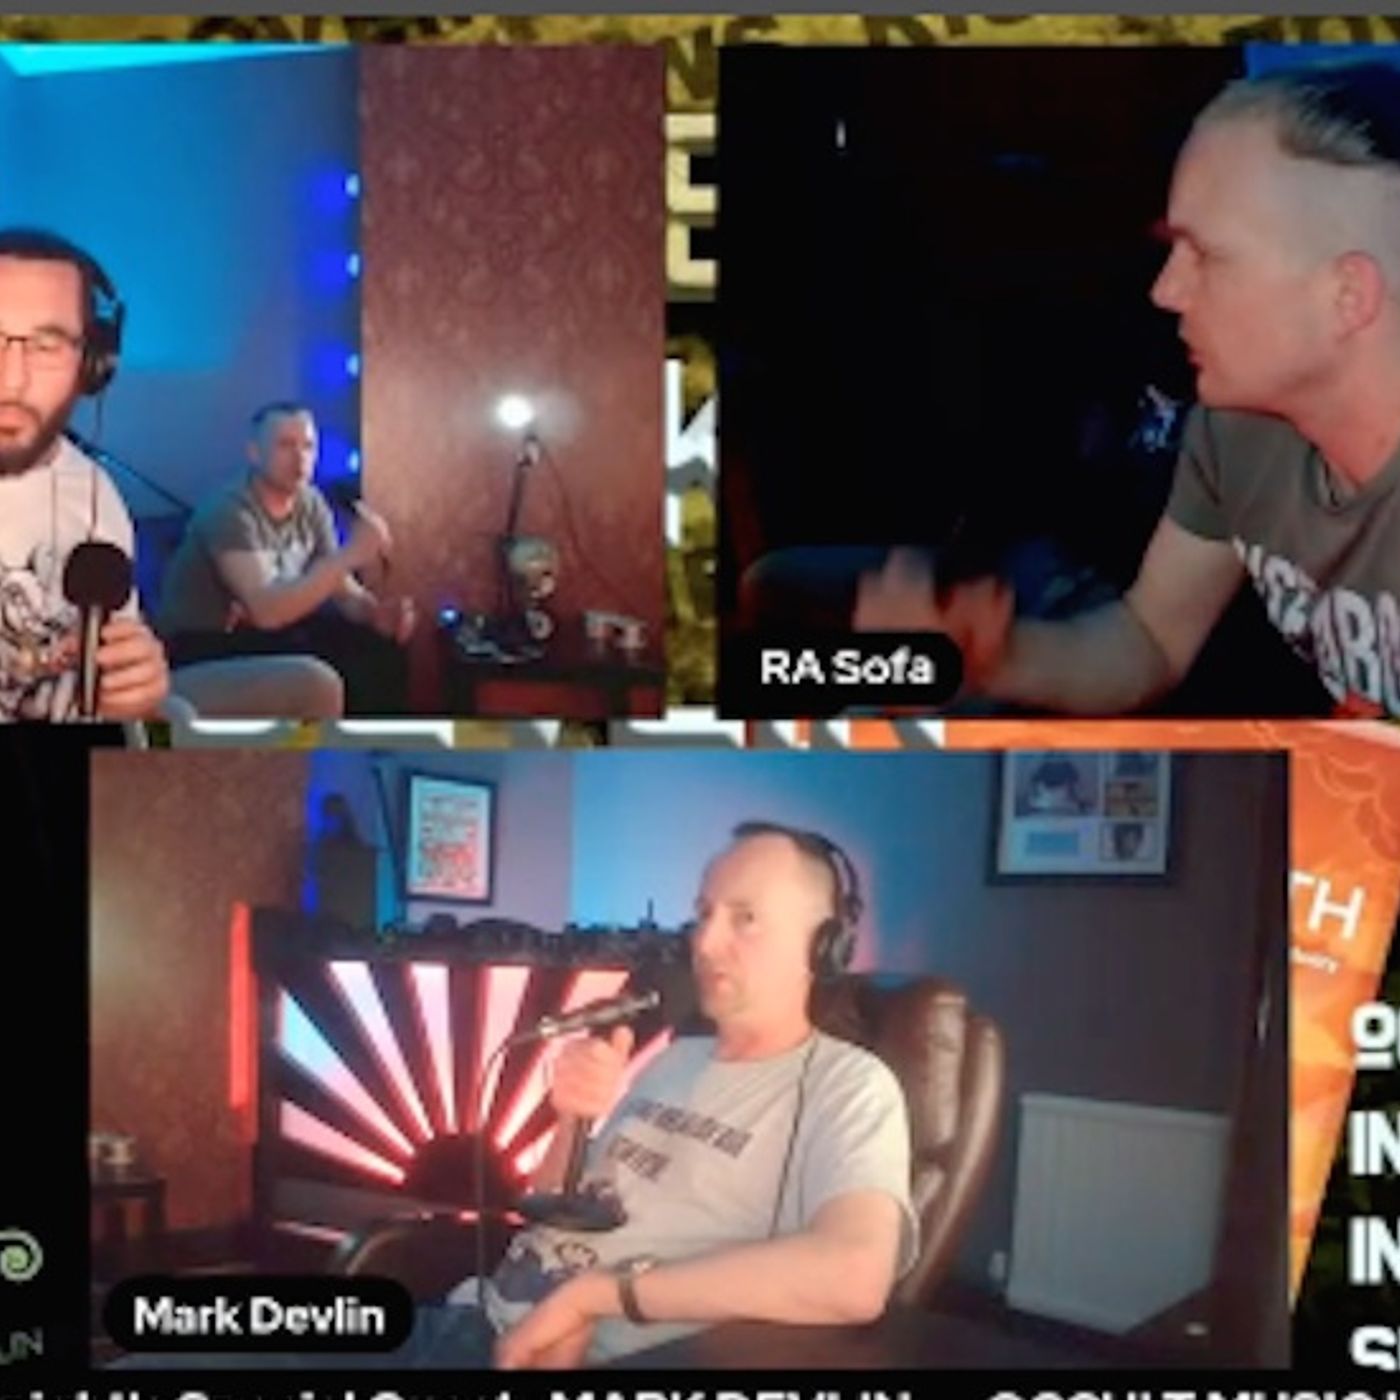 Mark Devlin guests on Rise Above livestream, 23/4/21